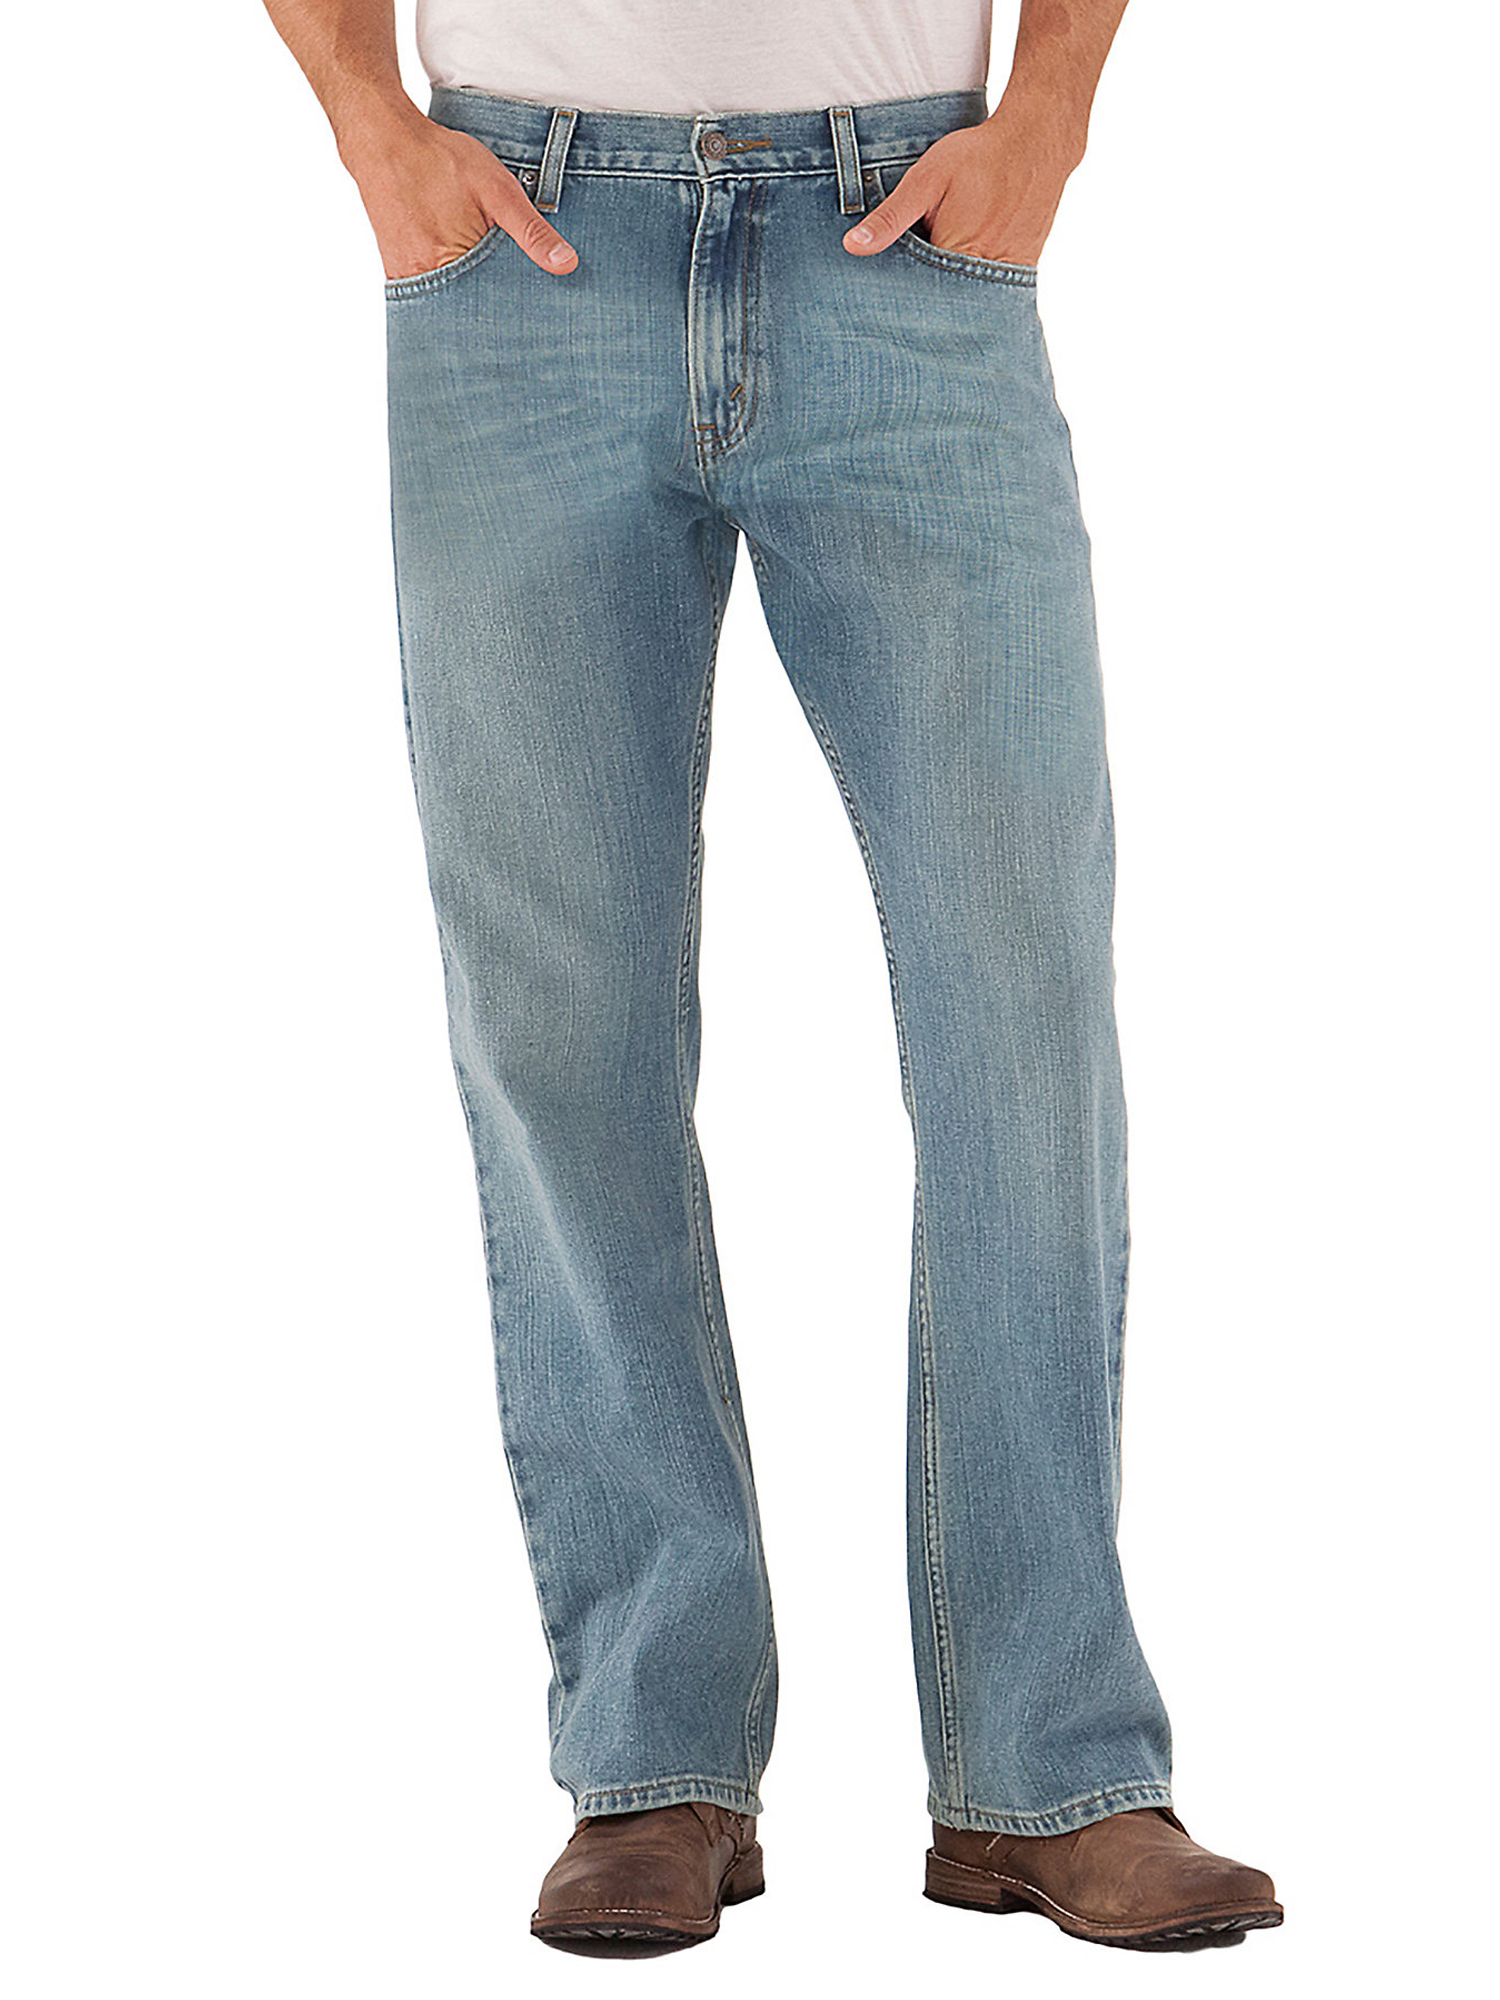 Signature by Levi Strauss & Co. Men's and Big and Tall Bootcut Jeans - image 1 of 7